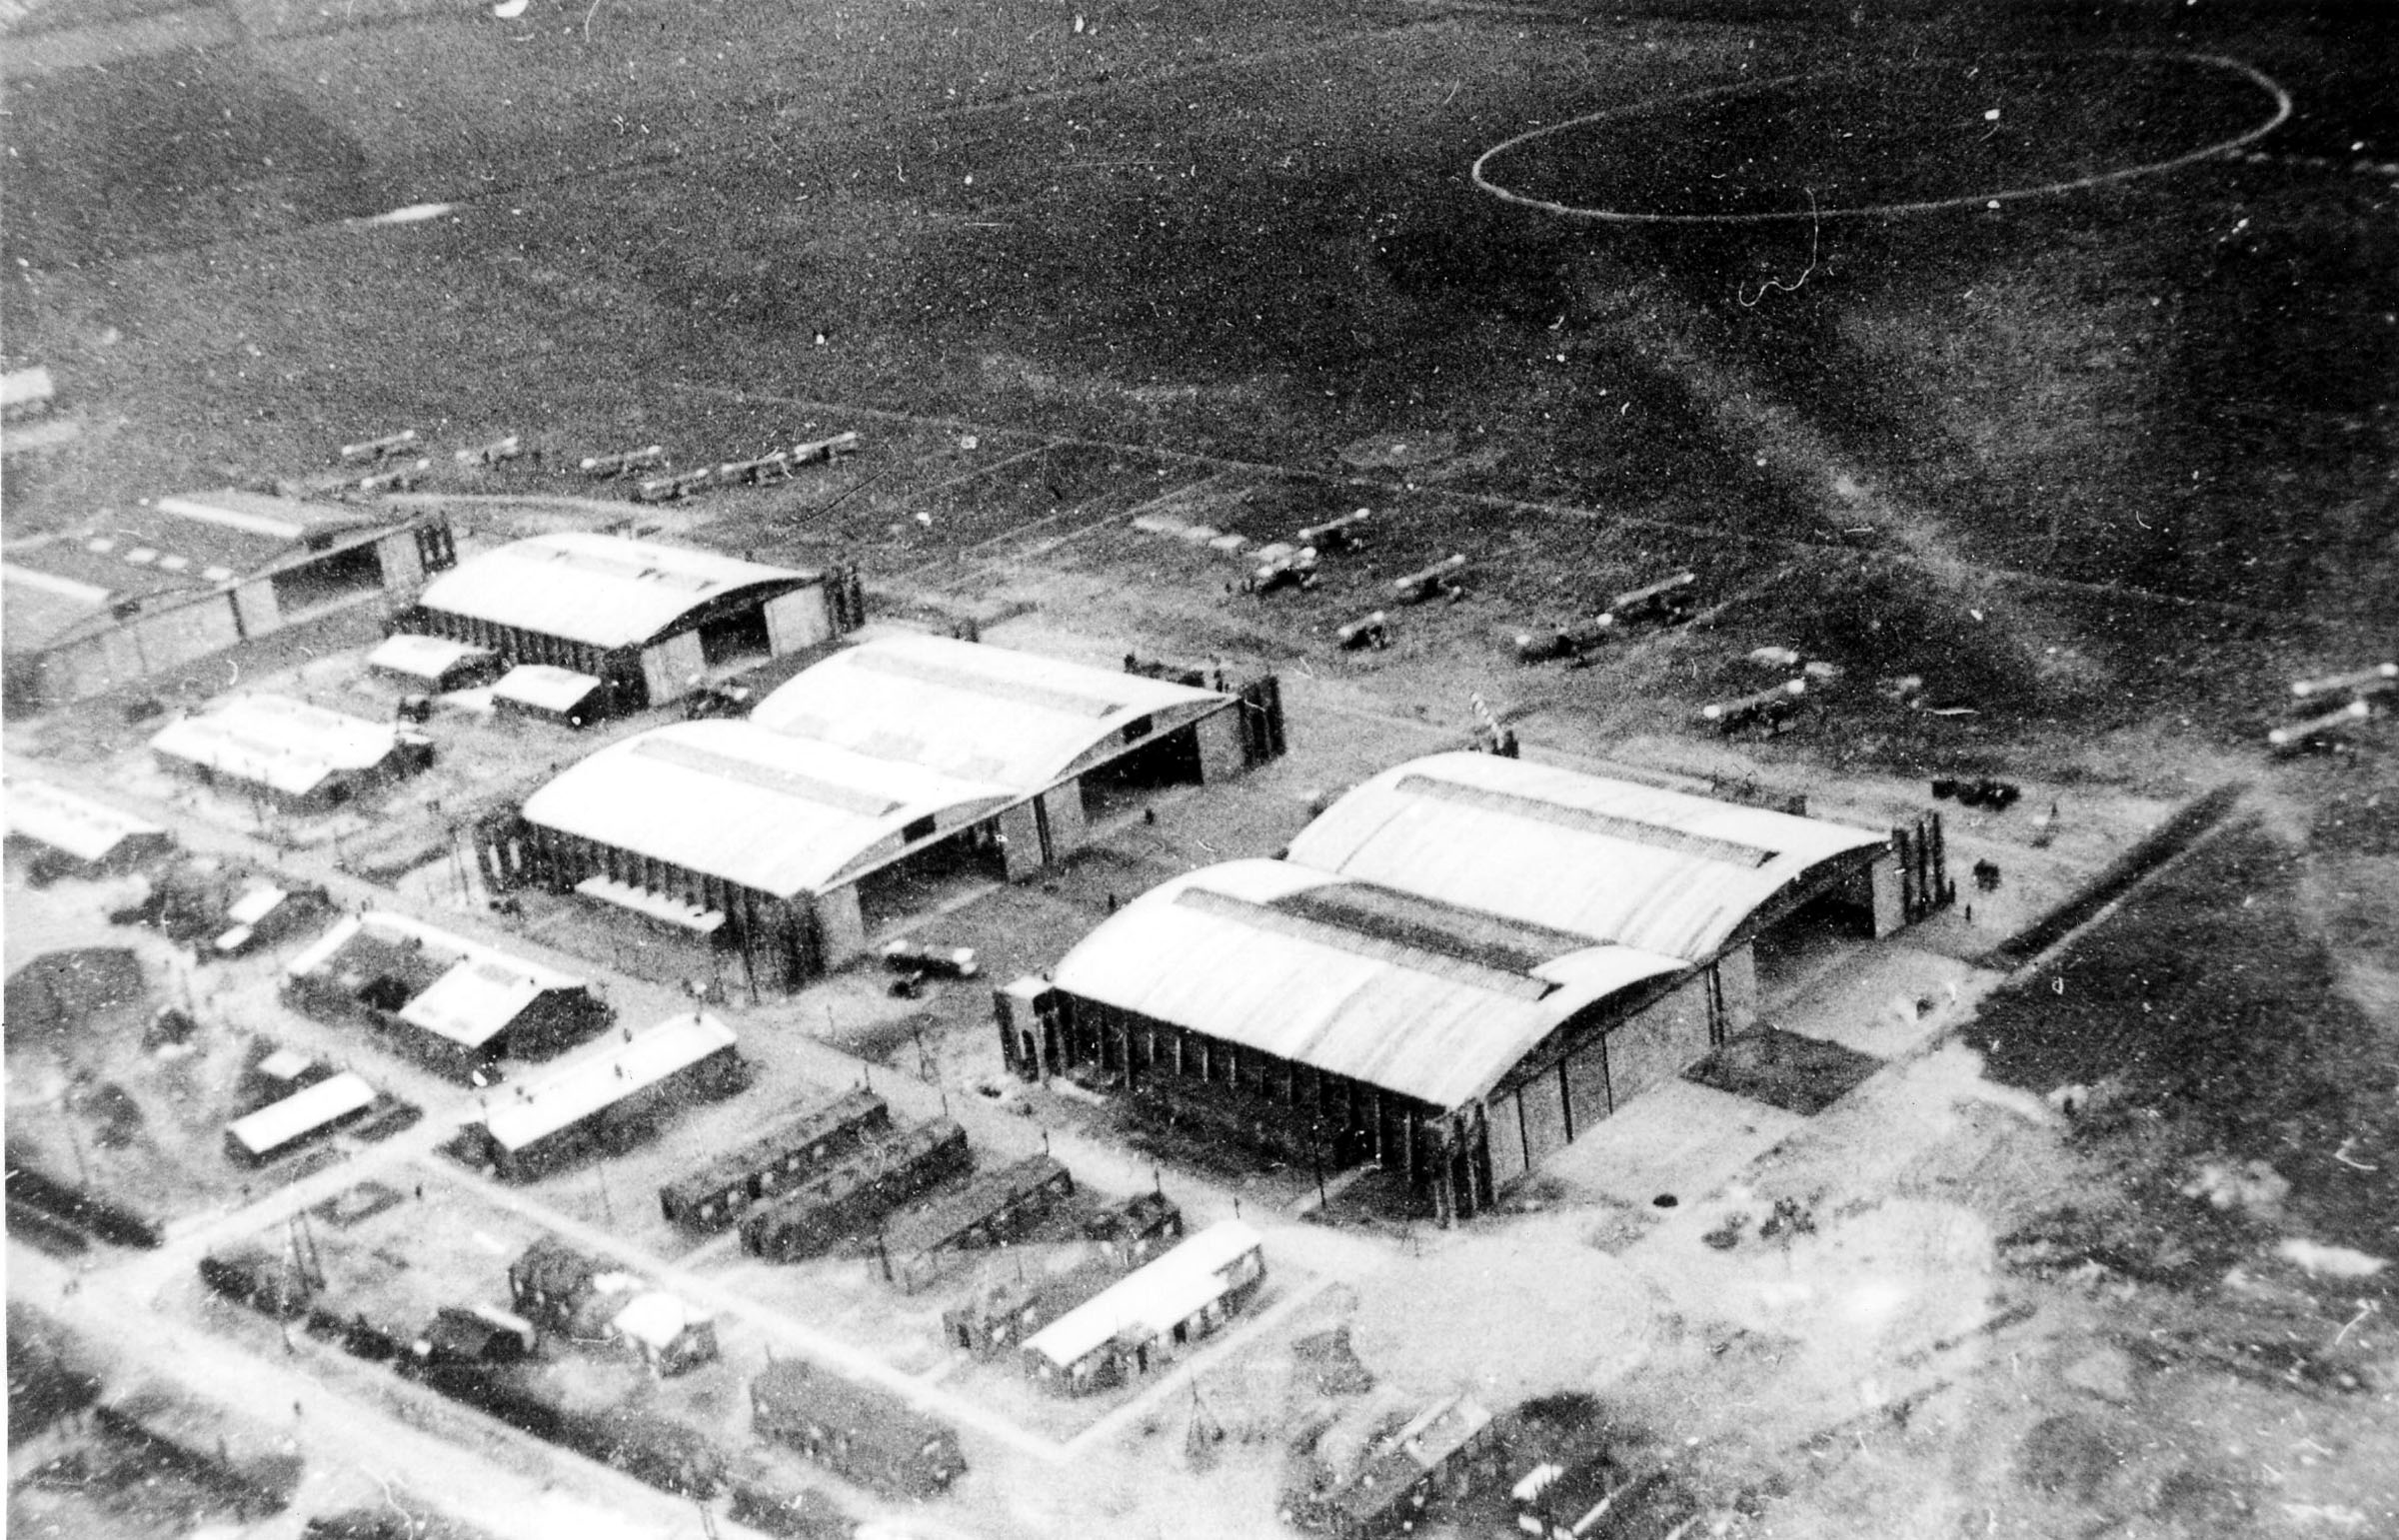 Fowlmere in 1918 showing the three double and one single Belfast Truss hangars on the east side of the Barley-Fowlmere road.  In the original print no fewer than sixteen DH4 or DH9 bombers are visible plus two smaller fighters, possibly Camels.  (Capt D S Glover via Peter Green)